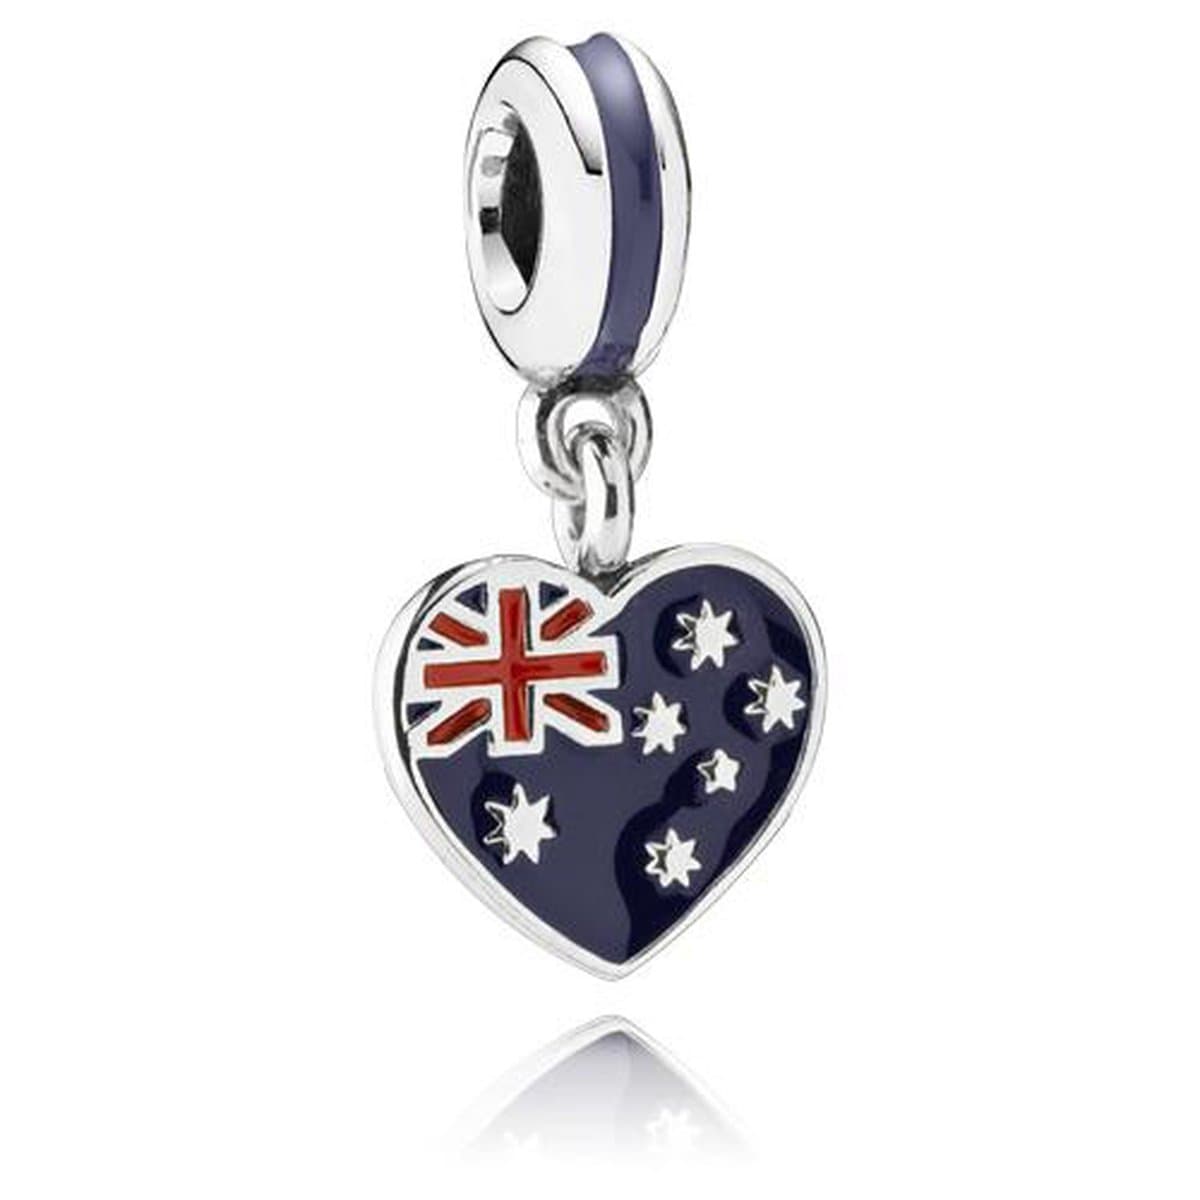 Enamel umbrella charms, red white and blue charms, charm bracelets, jewelry  charms, pendants and charms, patriotic charms